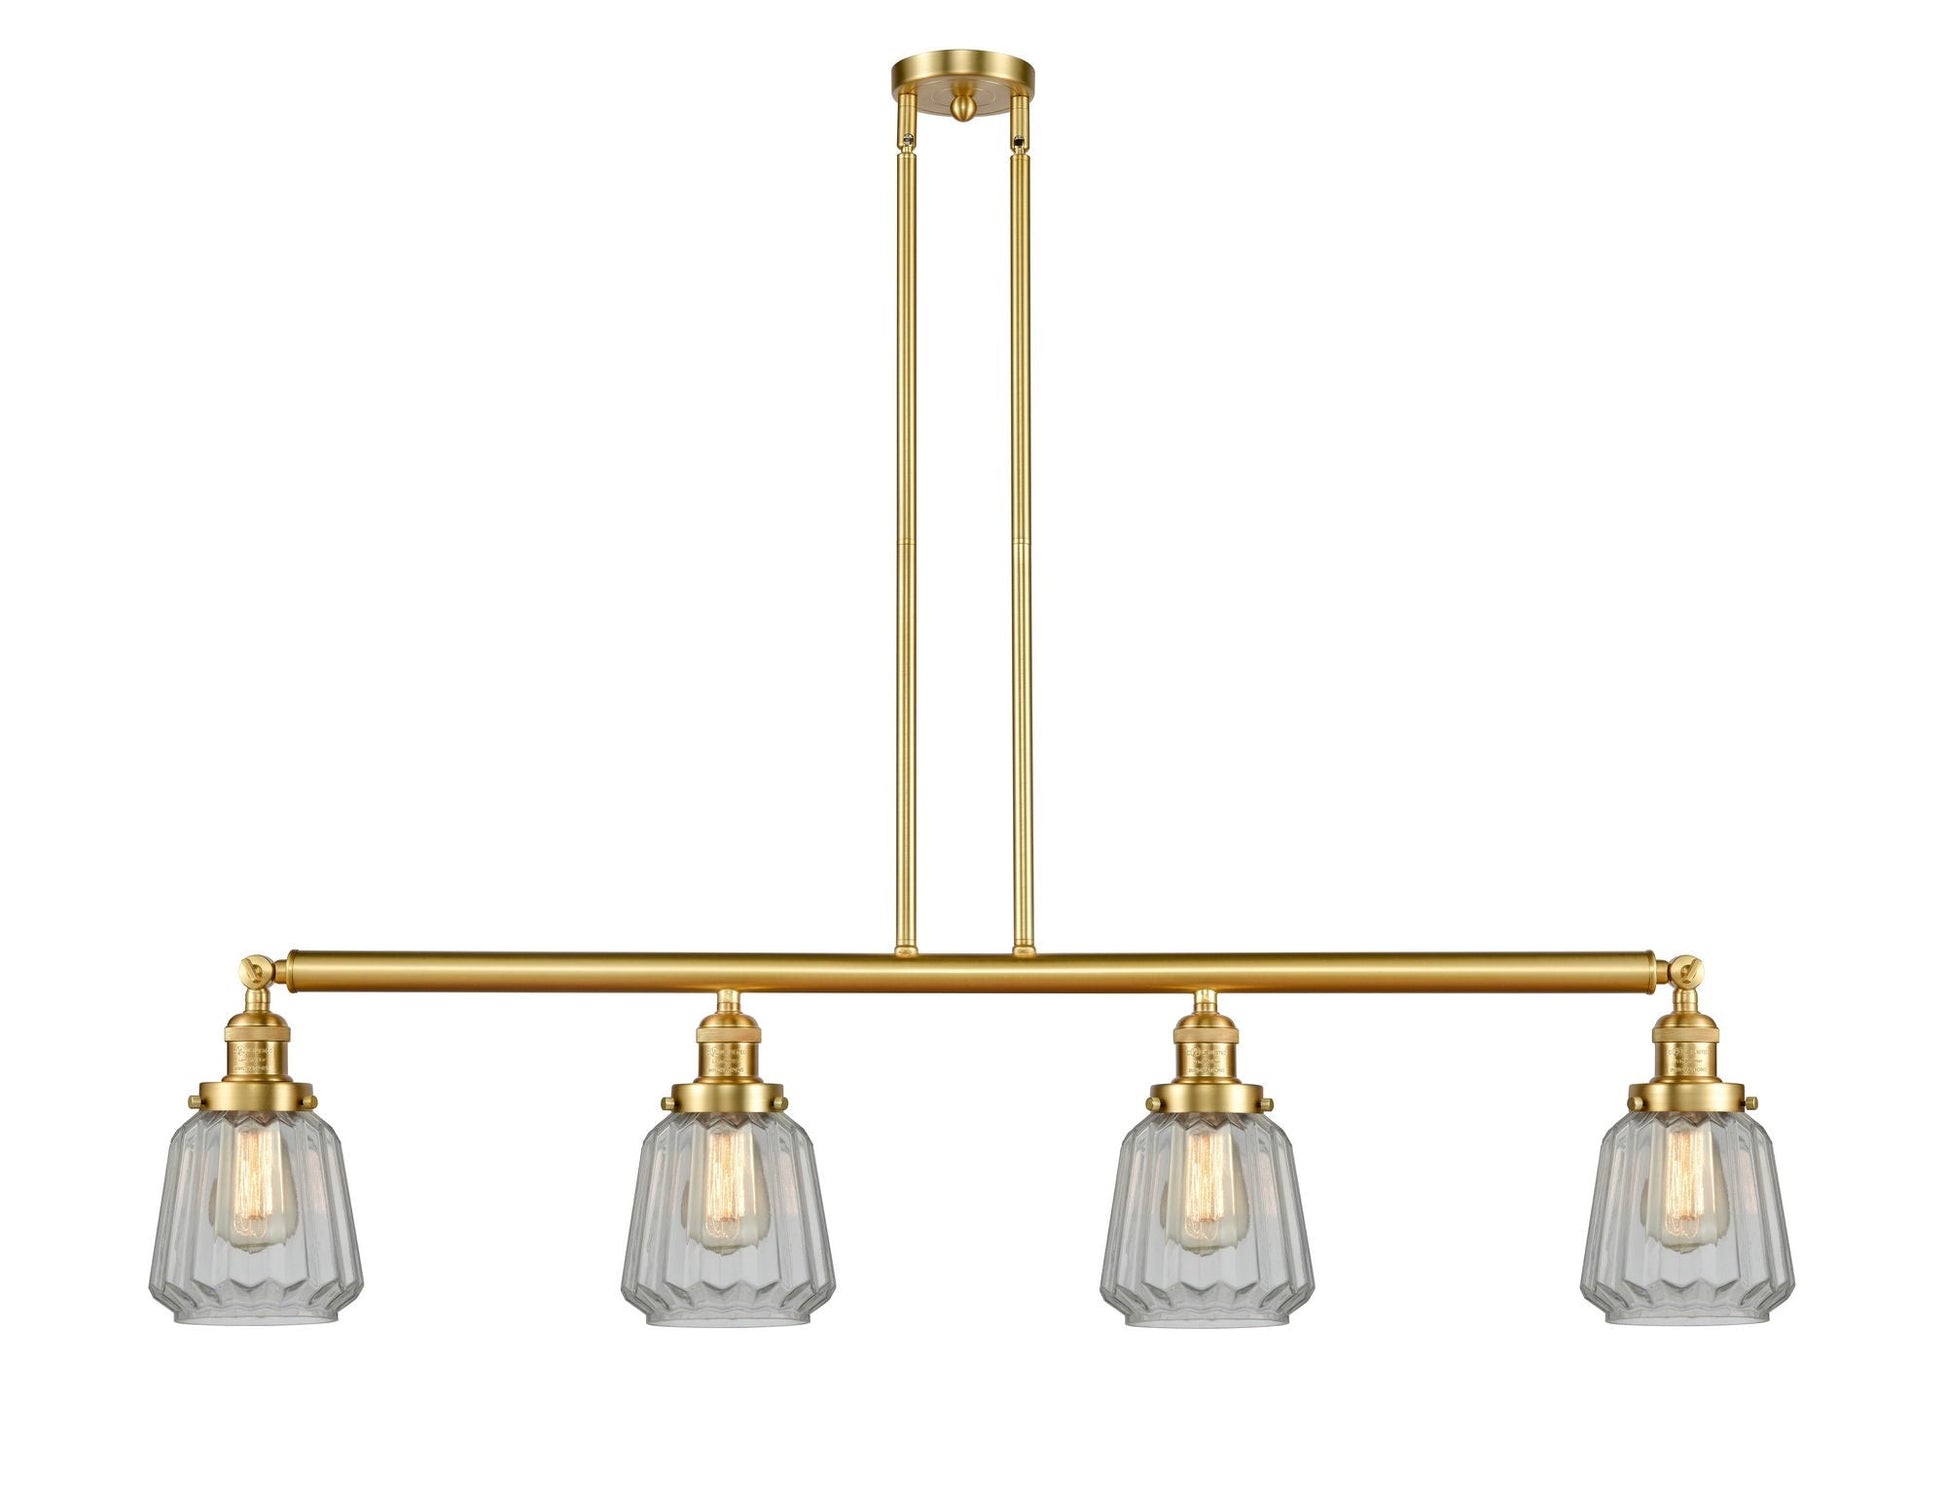 214-SG-G142 4-Light 50.875" Satin Gold Island Light - Clear Chatham Glass - LED Bulb - Dimmensions: 50.875 x 6.25 x 10<br>Minimum Height : 21<br>Maximum Height : 45 - Sloped Ceiling Compatible: Yes